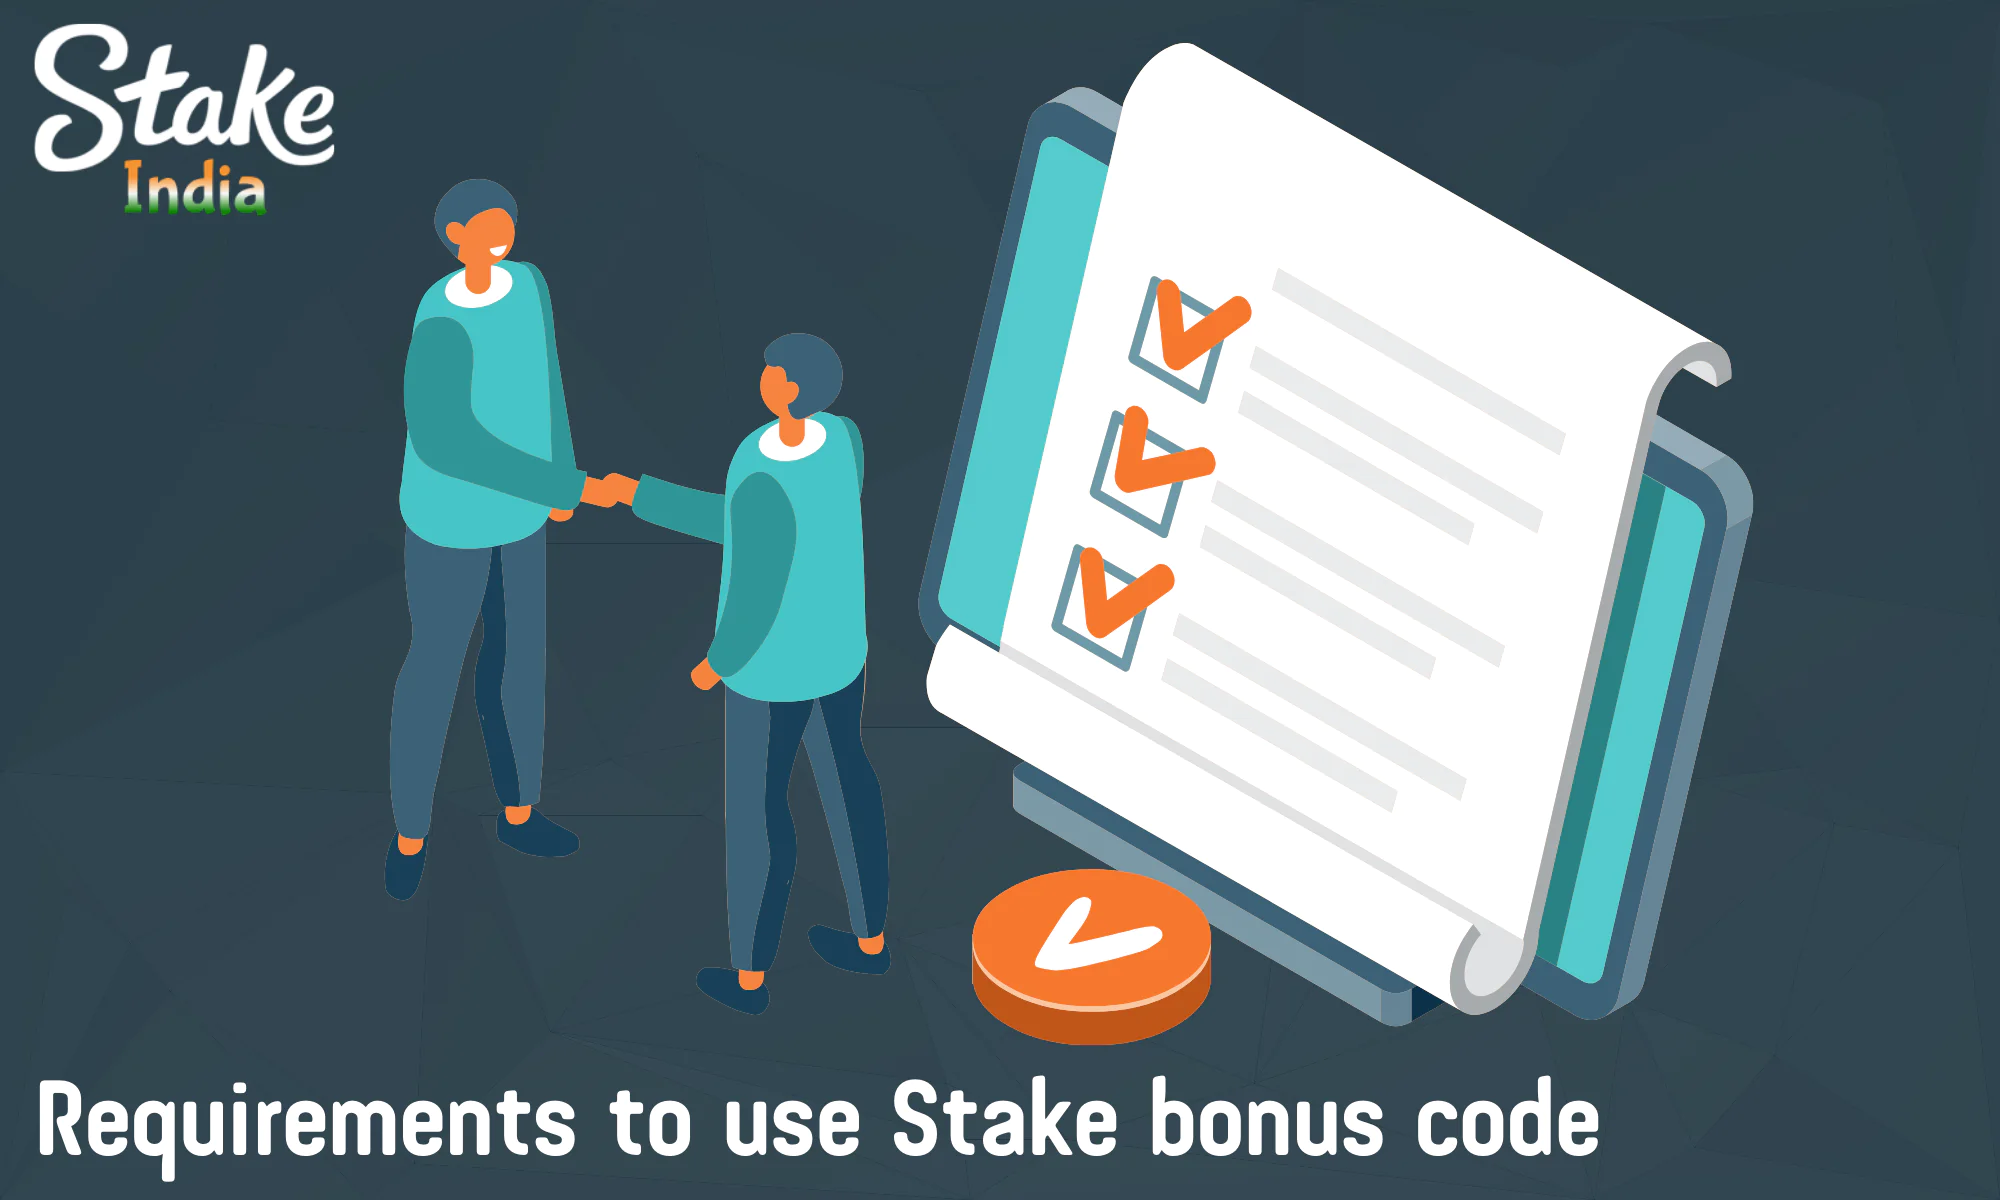 Bonus codes from Stake can be activated under certain conditions